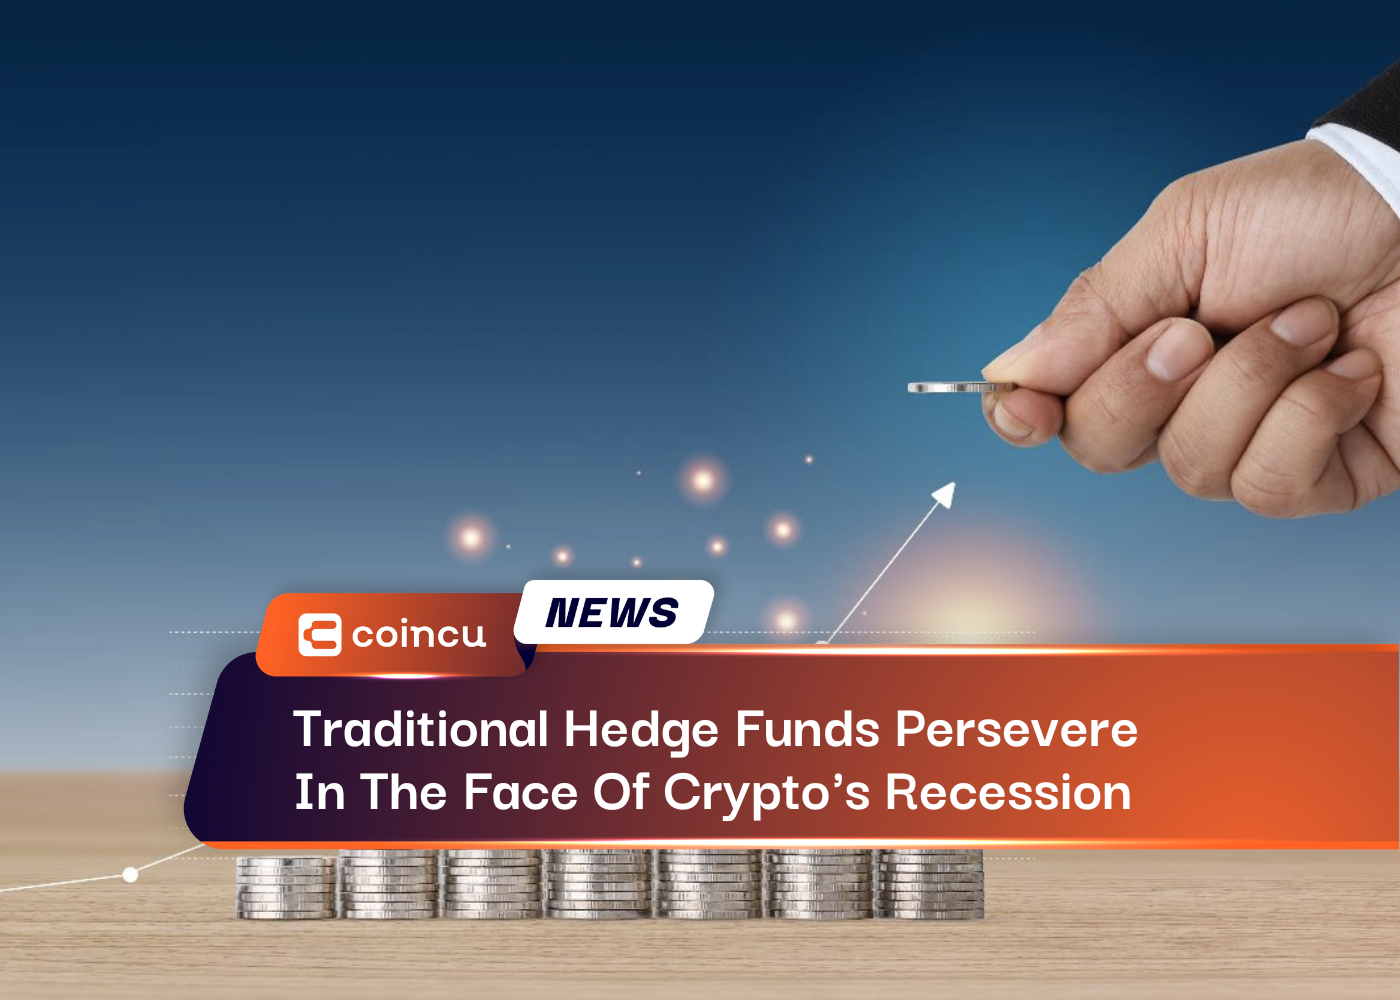 Traditional Hedge Funds Persevere In The Face Of Crypto's Recession